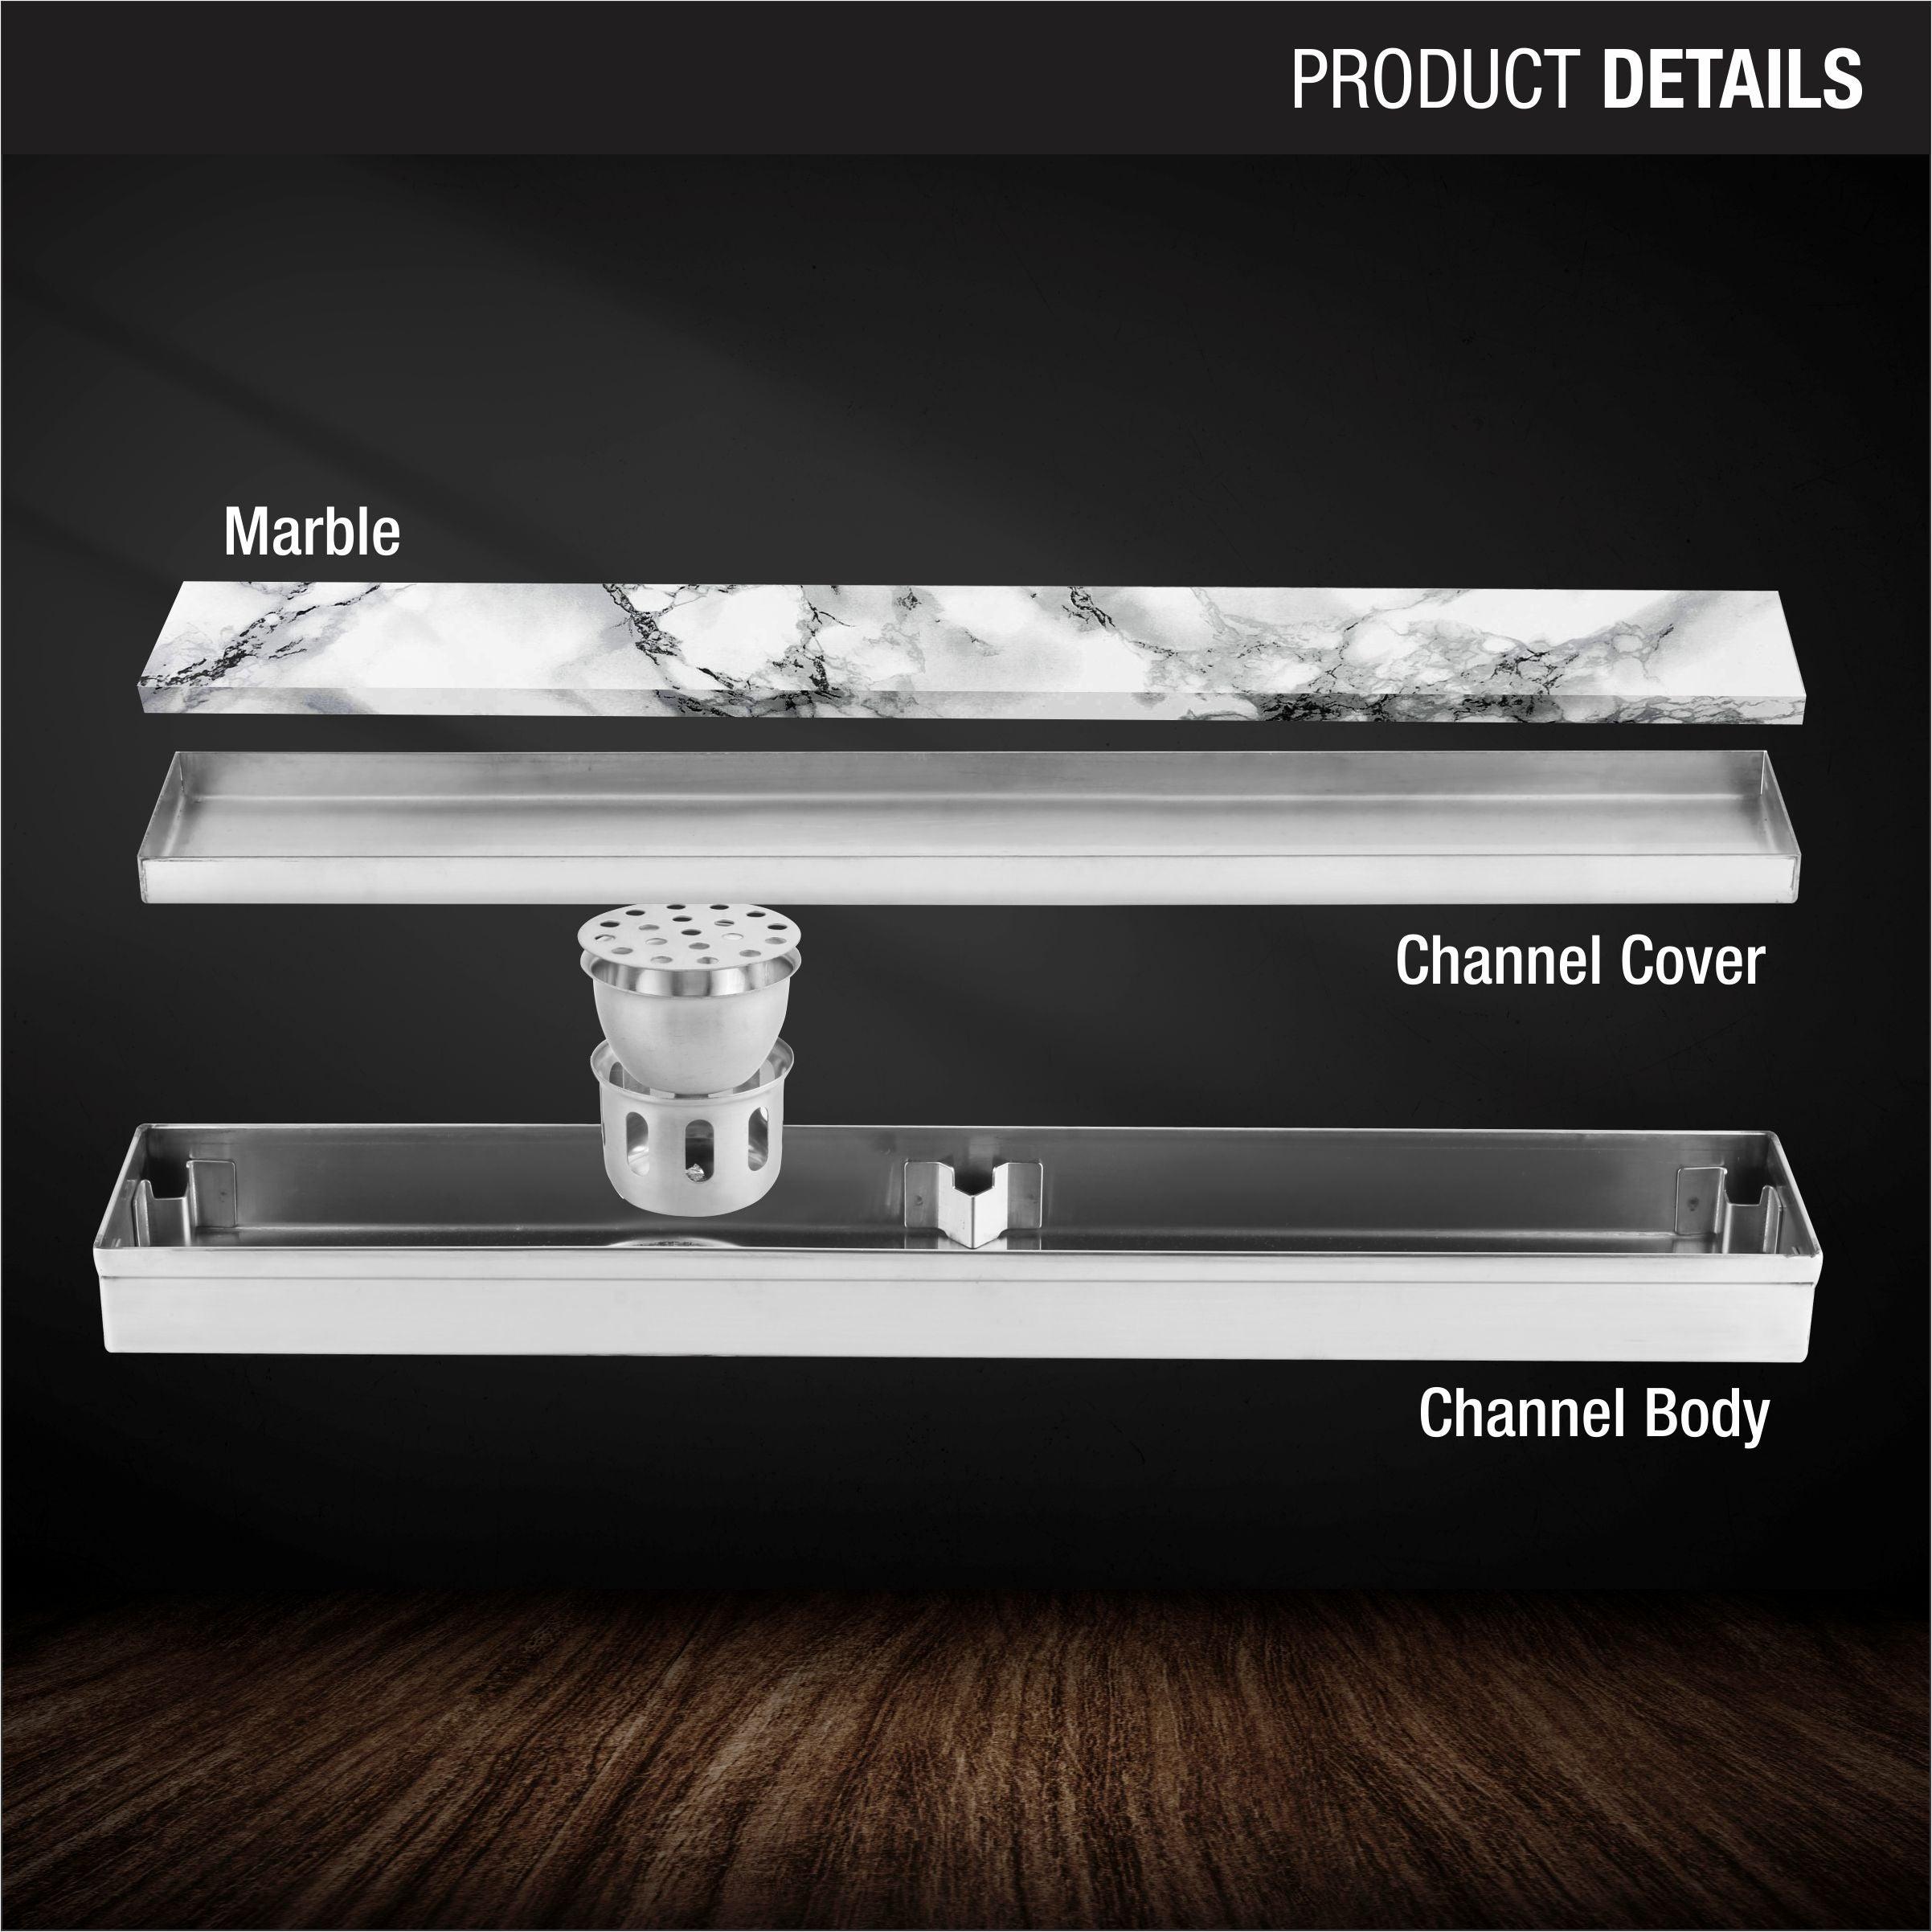 Marble Insert Shower Drain Channel (48 x 3 Inches) product details